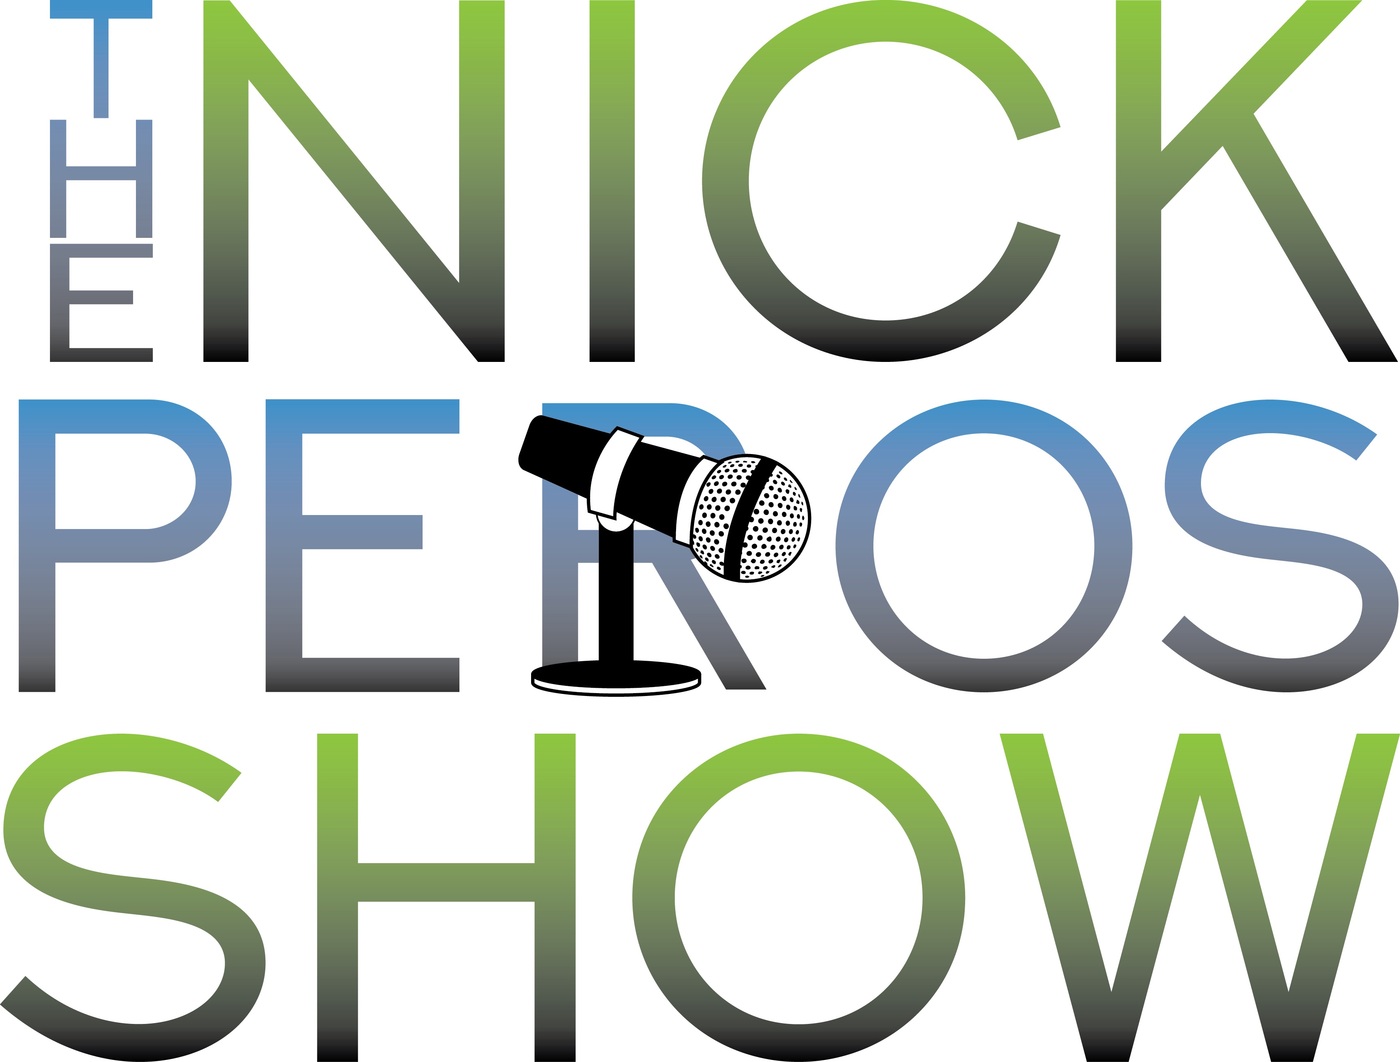 The Nick Peros Show - Episode 8 - Honey Deuces at The US Open